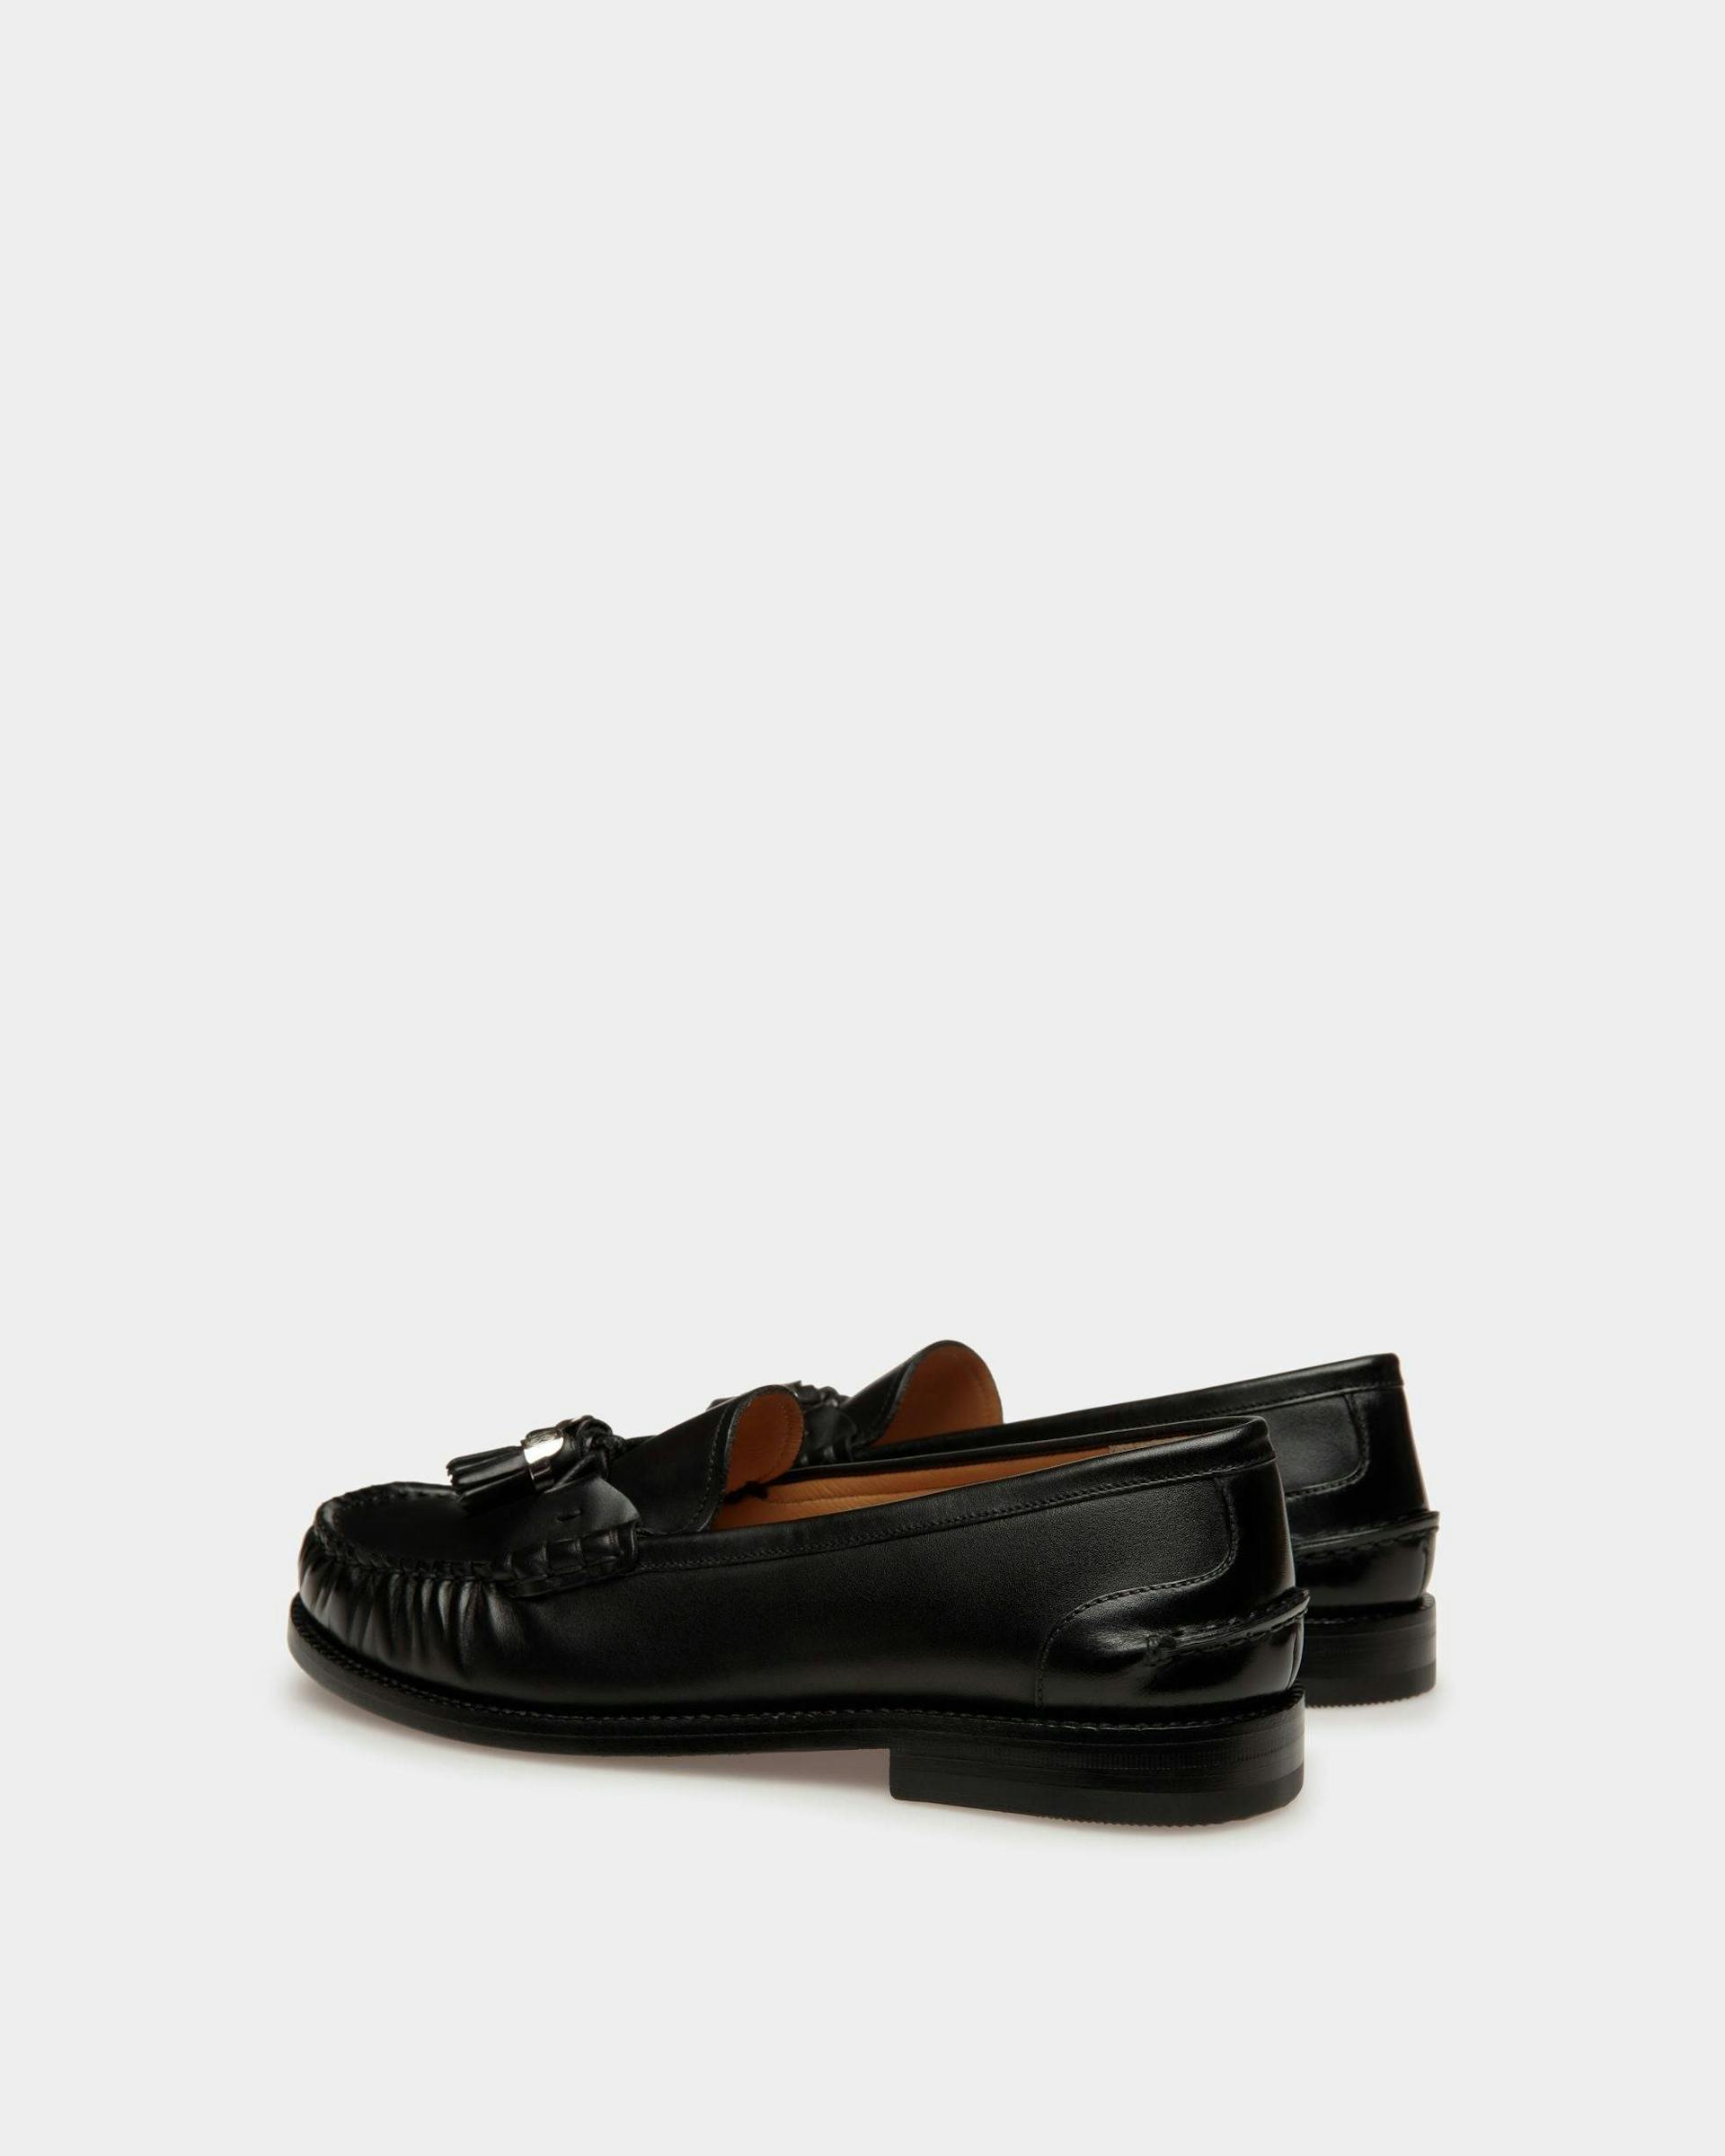 Rome Moccasins In Black Leather - Women's - Bally - 03